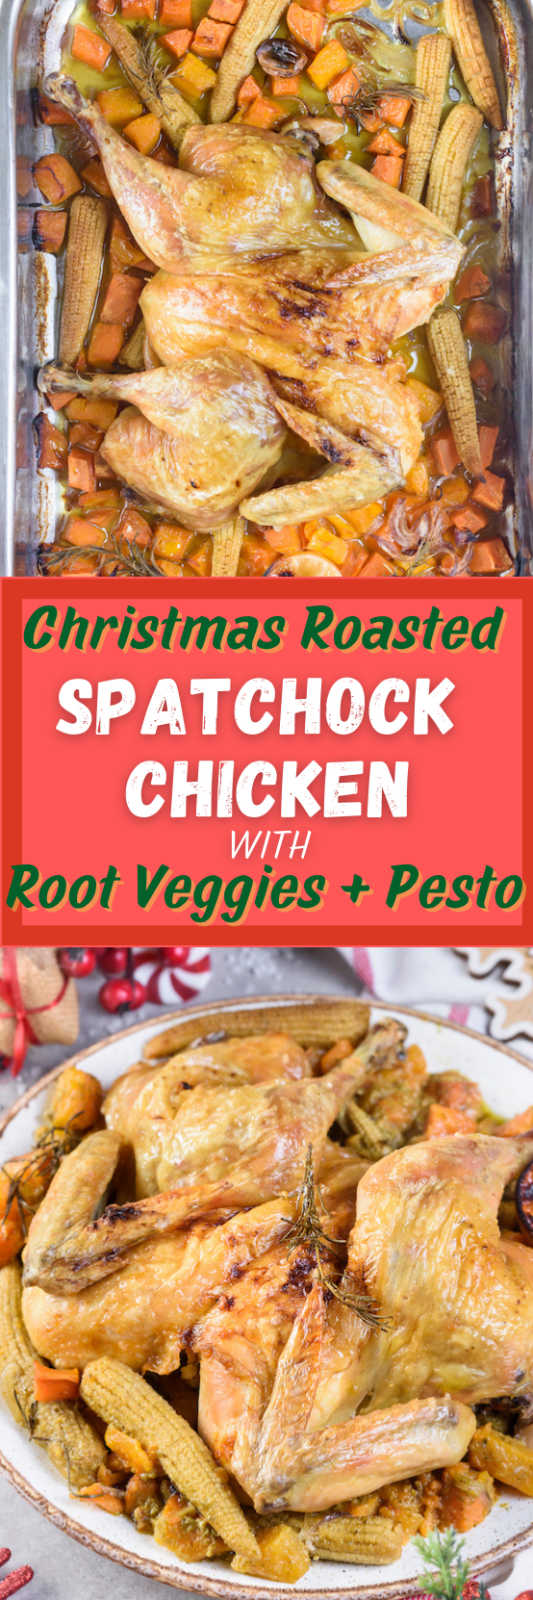 Christmas Roasted Spatchock Chicken with Root Veggies + Pesto | Clean ...